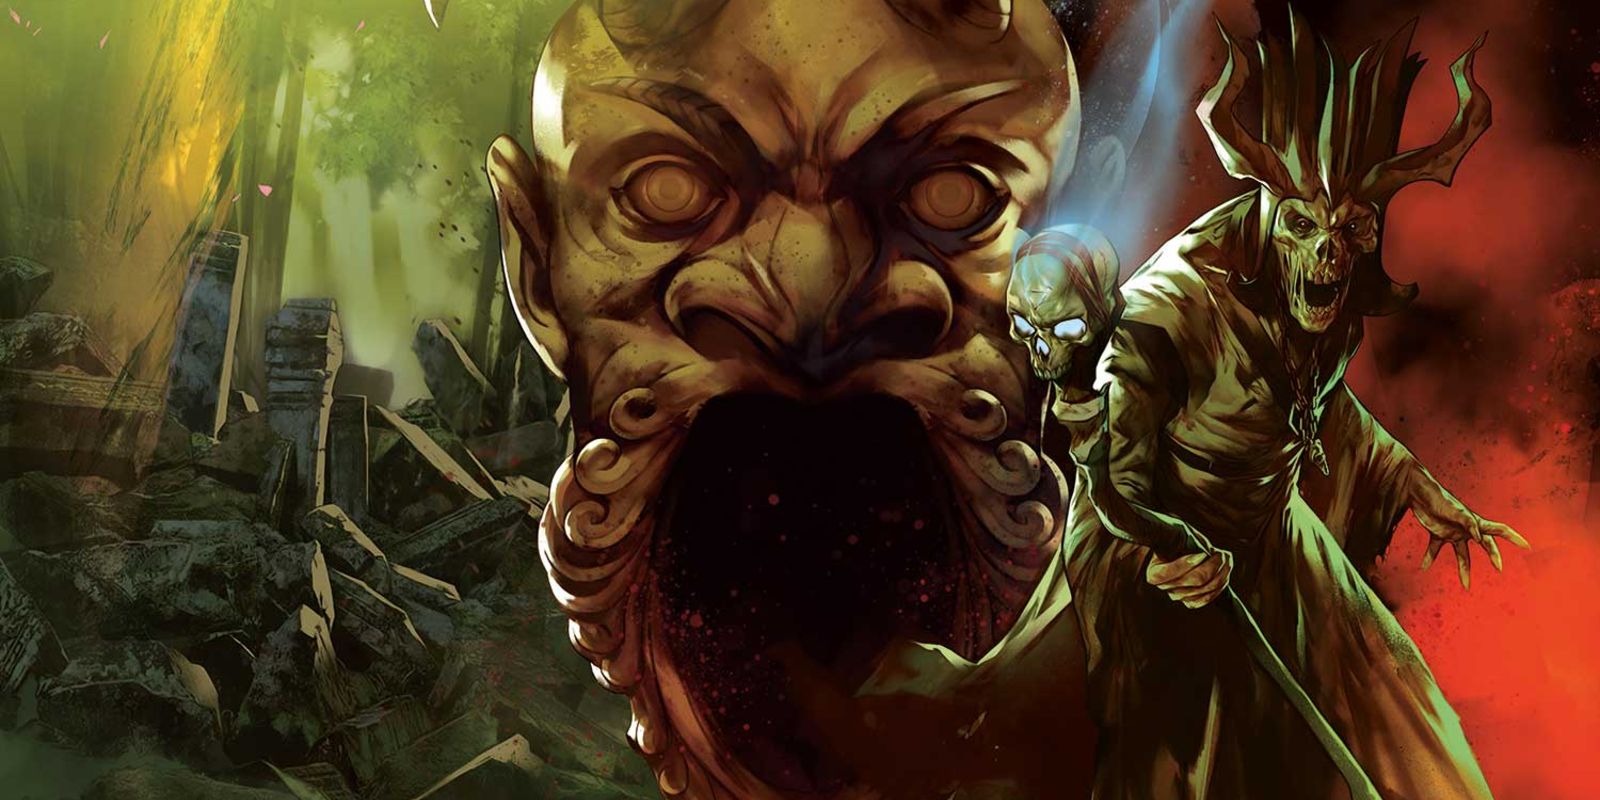 An image of cover art for the published DnD campaign, Tomb of Annihilation